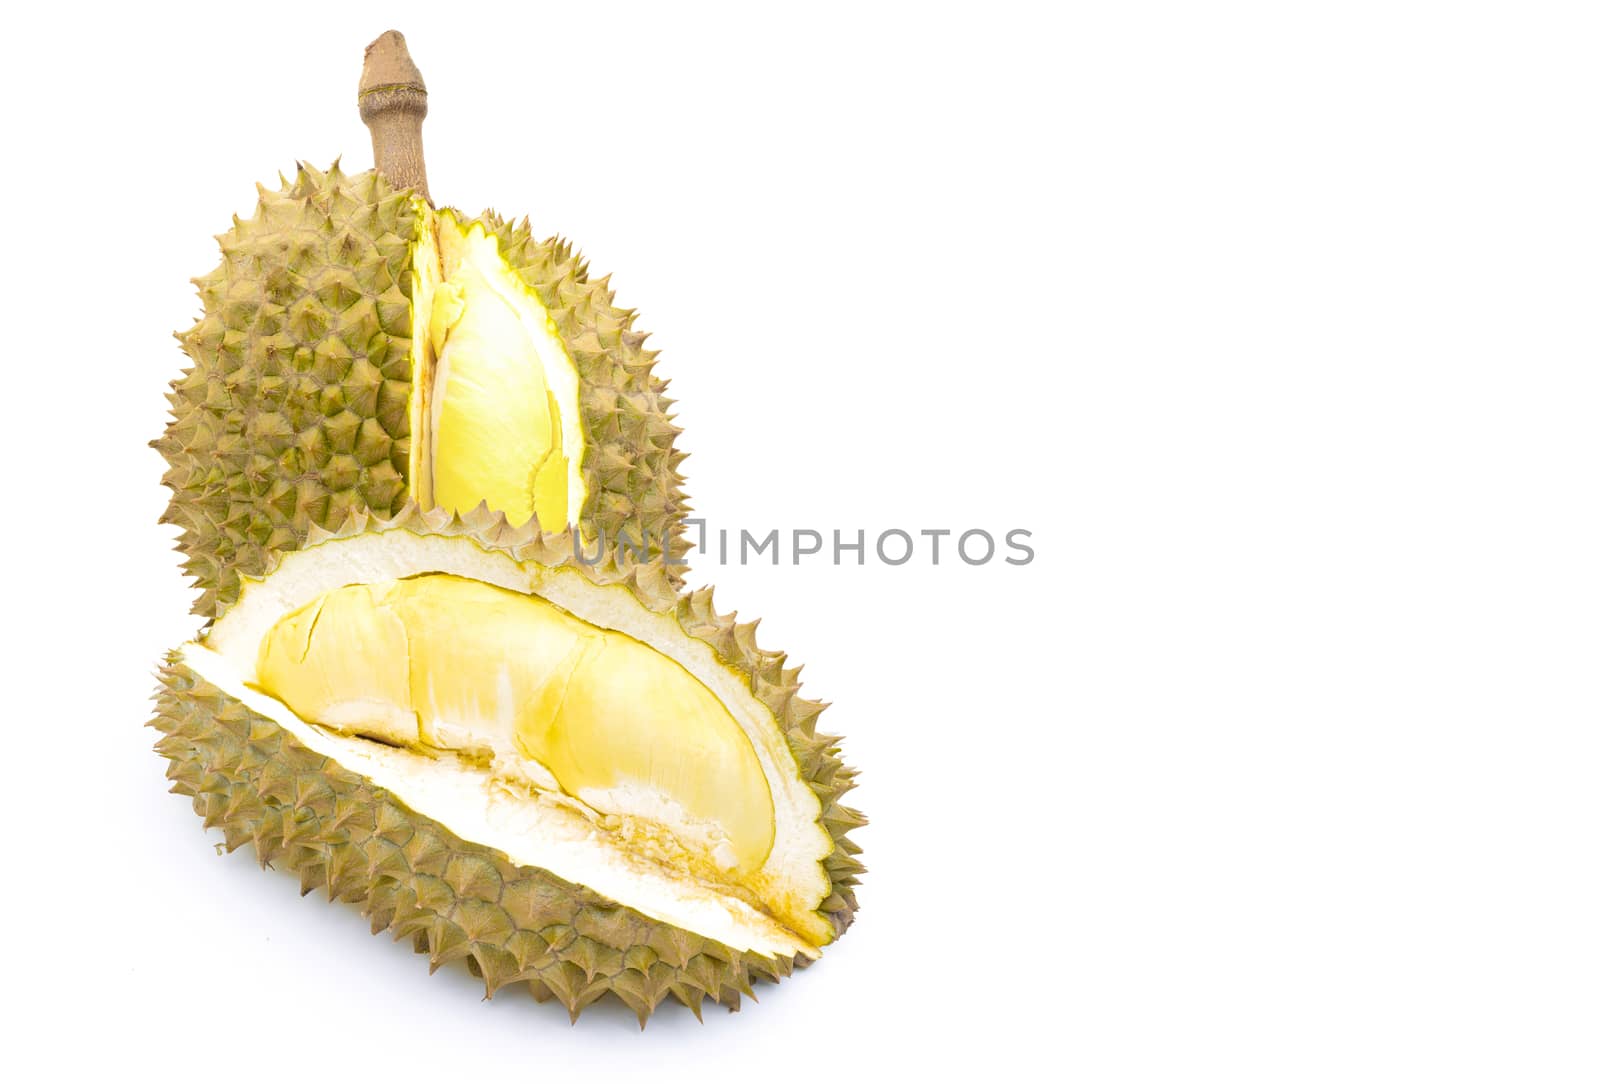 Durian fruit on a white background by sompongtom